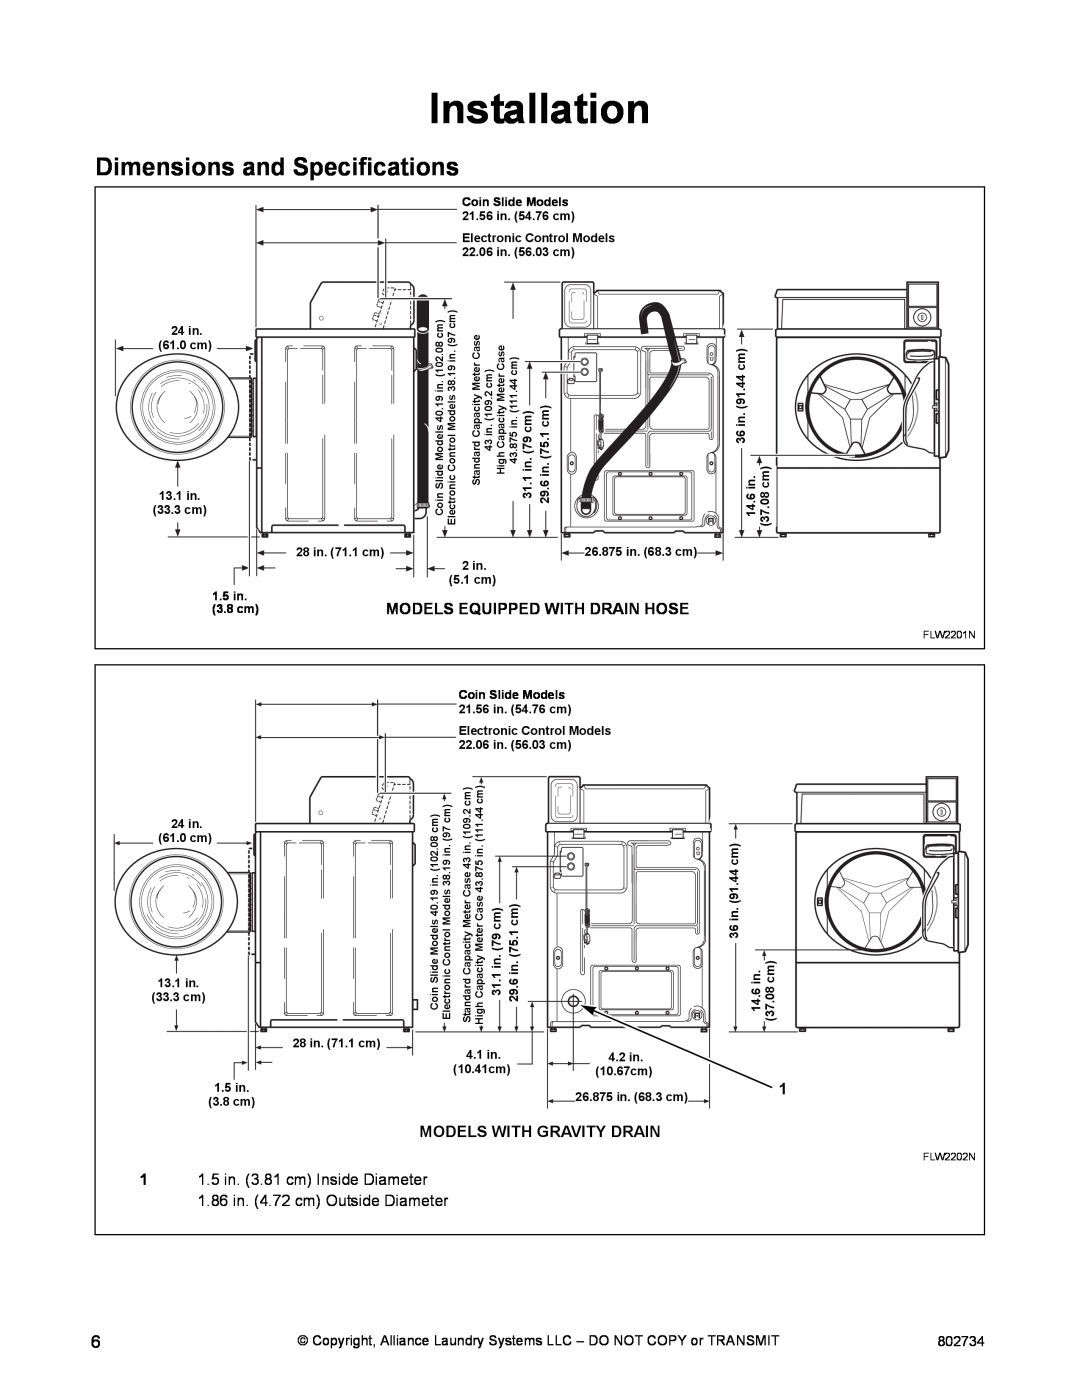 Alliance Laundry Systems FLW1526C Installation, Dimensions and Specifications, 1.86 in. 4.72 cm Outside Diameter, 802734 